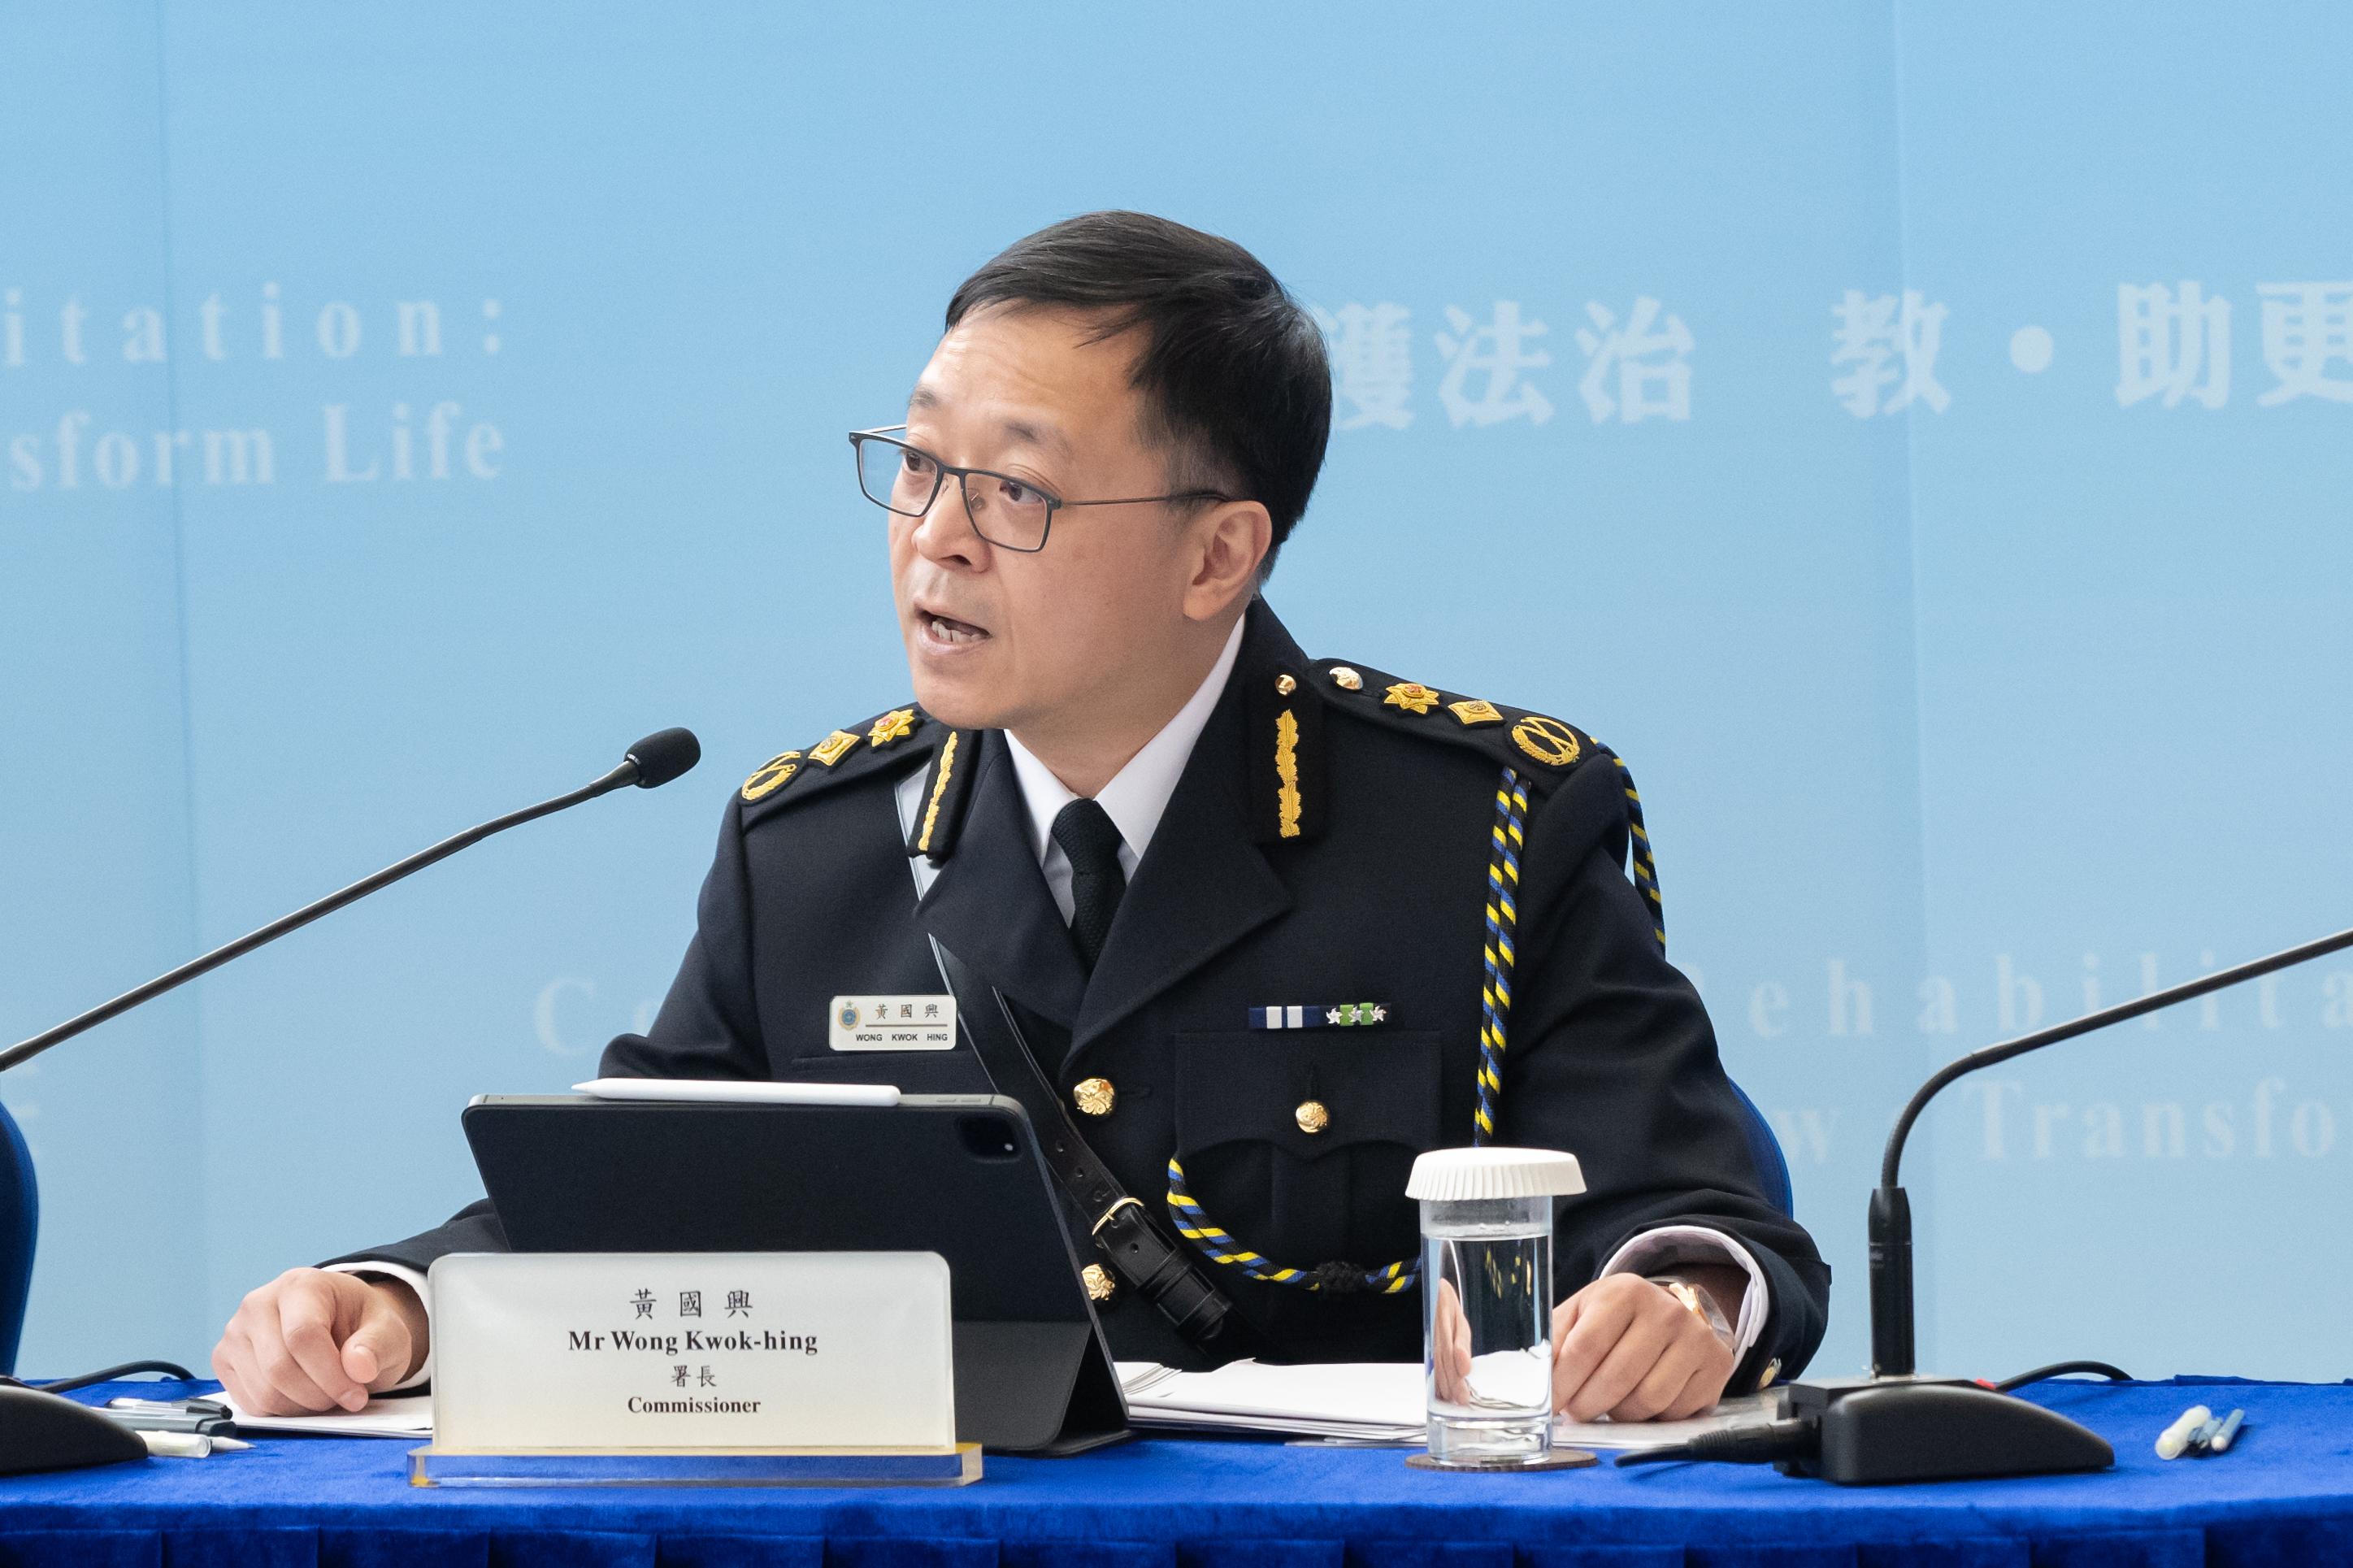 The Commissioner of Correctional Services, Mr Wong Kwok-hing, today (February 22) hosted the annual press conference on the Correctional Services Department's work over the past year.